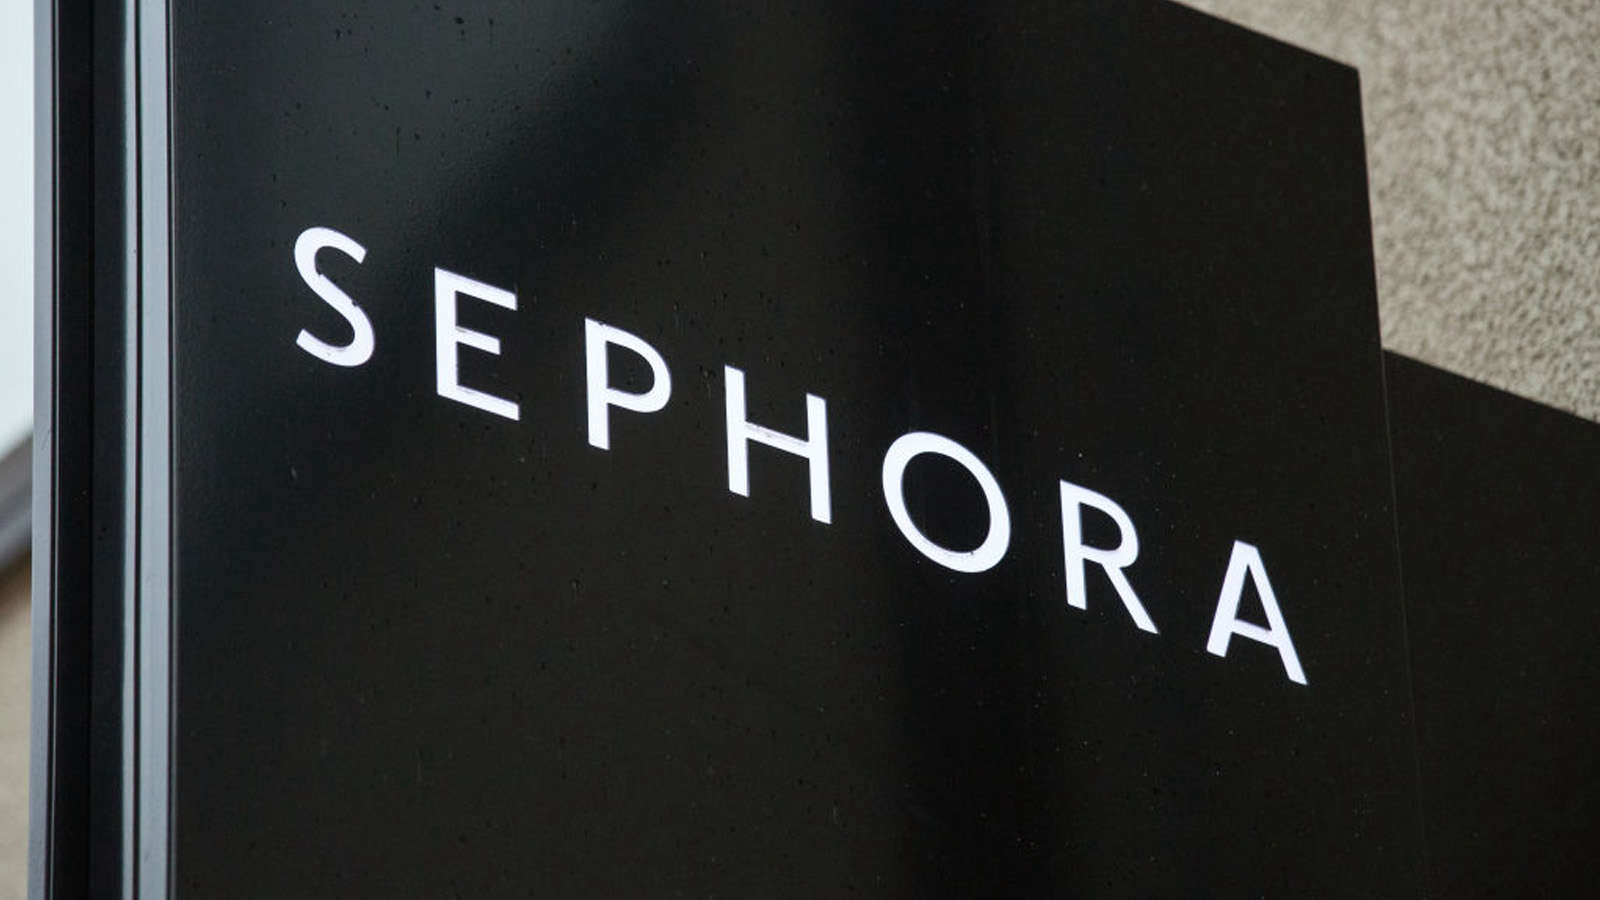 SEPHORA: Possible change to open up shopping for Irish customers